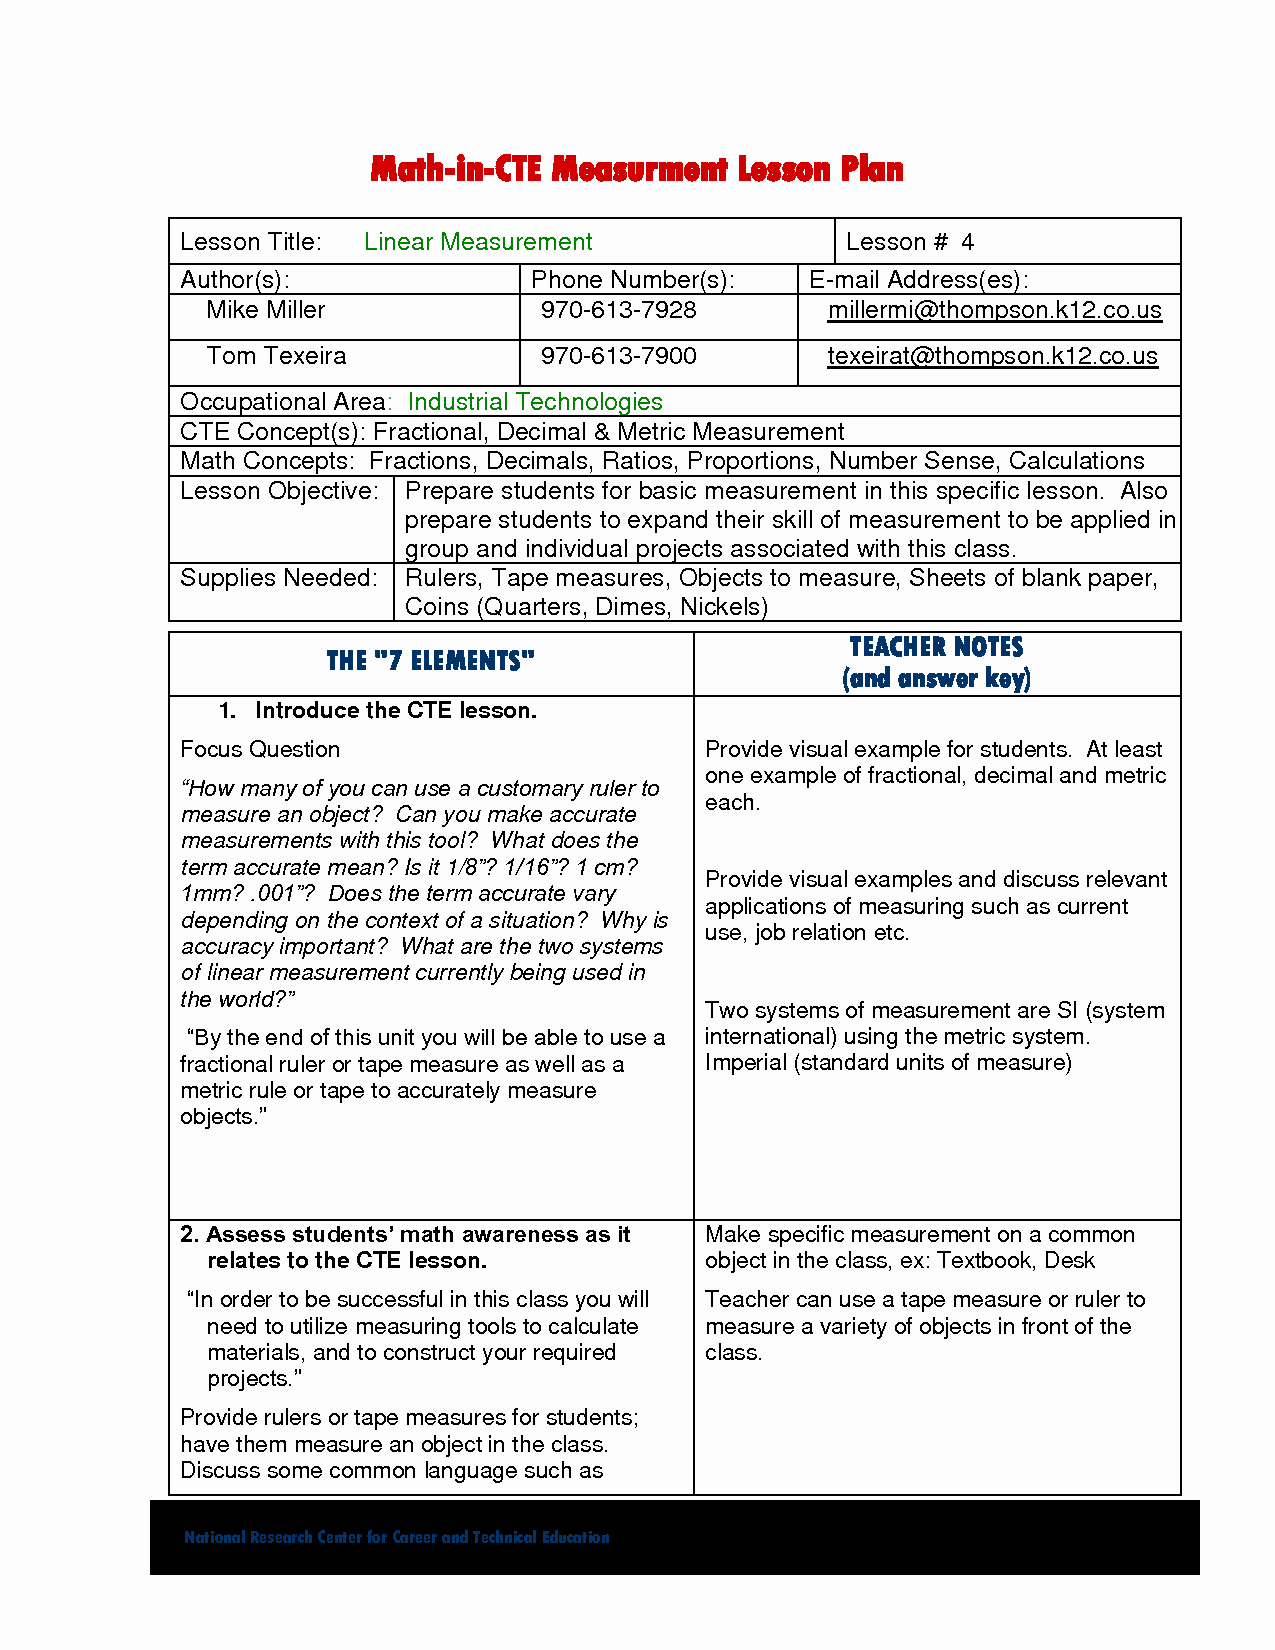 Math Lesson Plan Template New Best S Of Math Lesson Plan Template Math Lesson Plan Template Word Weekly Math Lesson